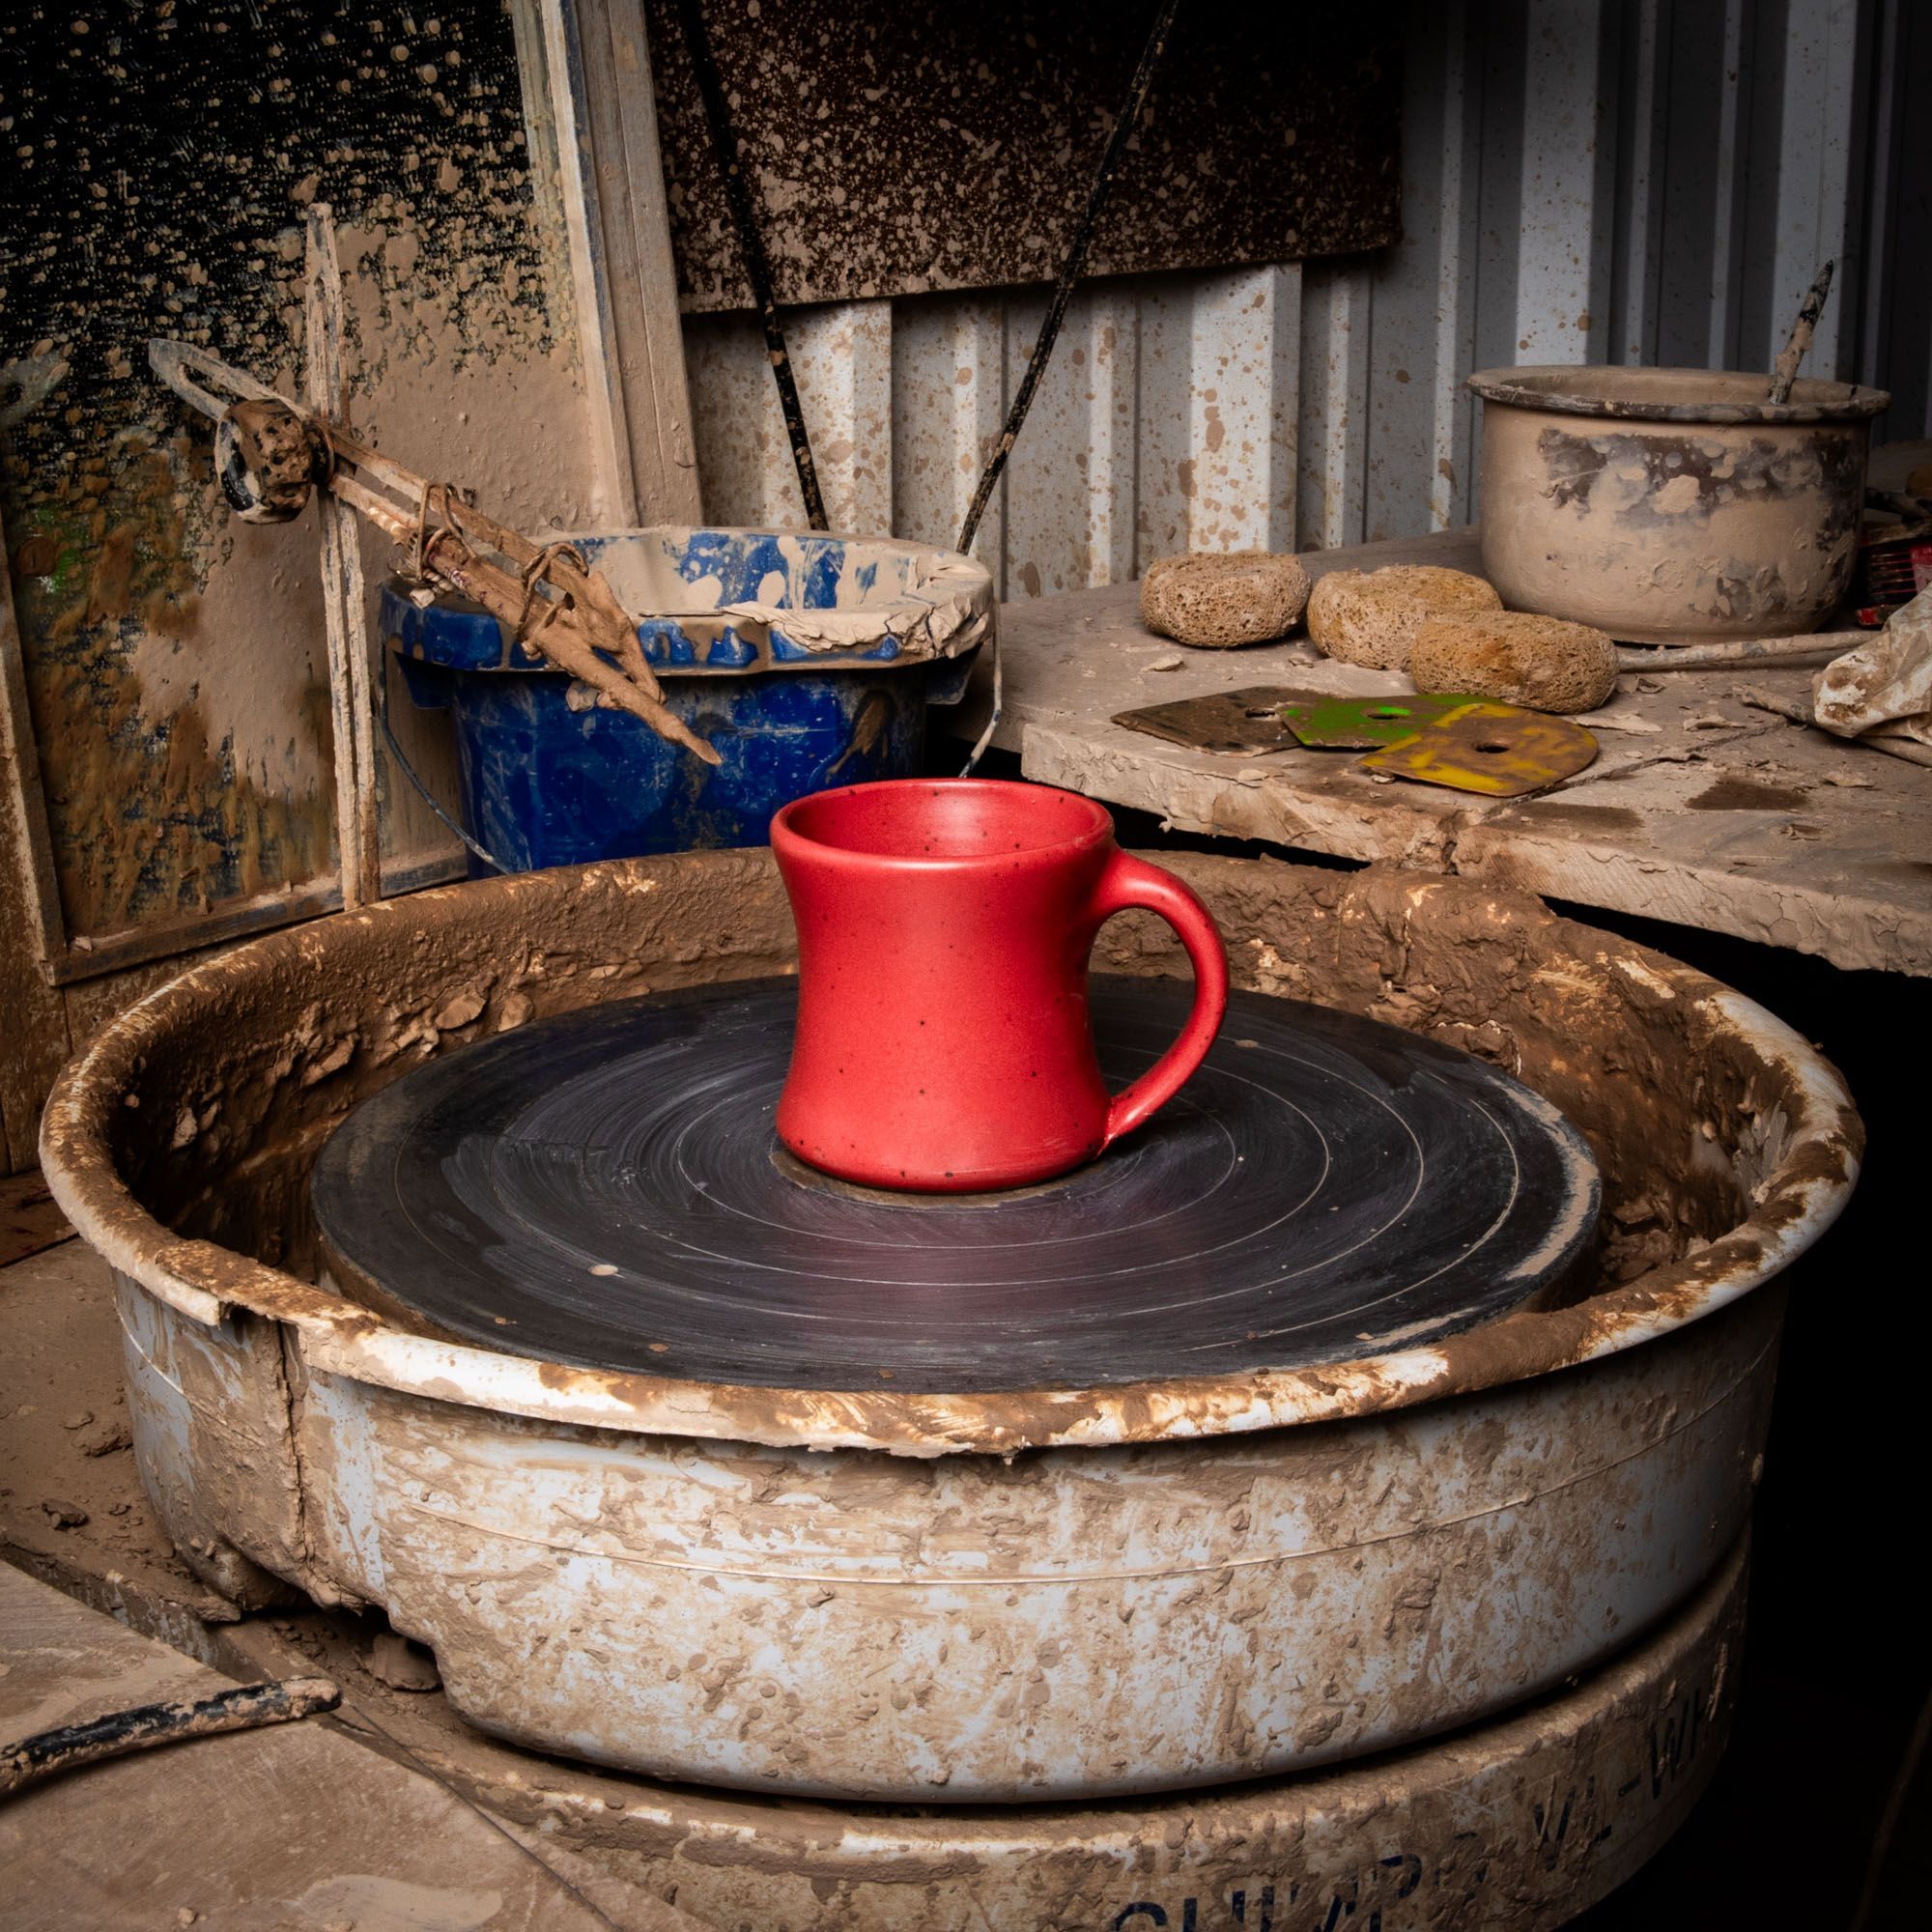 In a pottery studio setting and on a potter's wheel sits a classic diner mug that tapers out on the top and bottom in a bold red color featuring iron speckles and a handle.